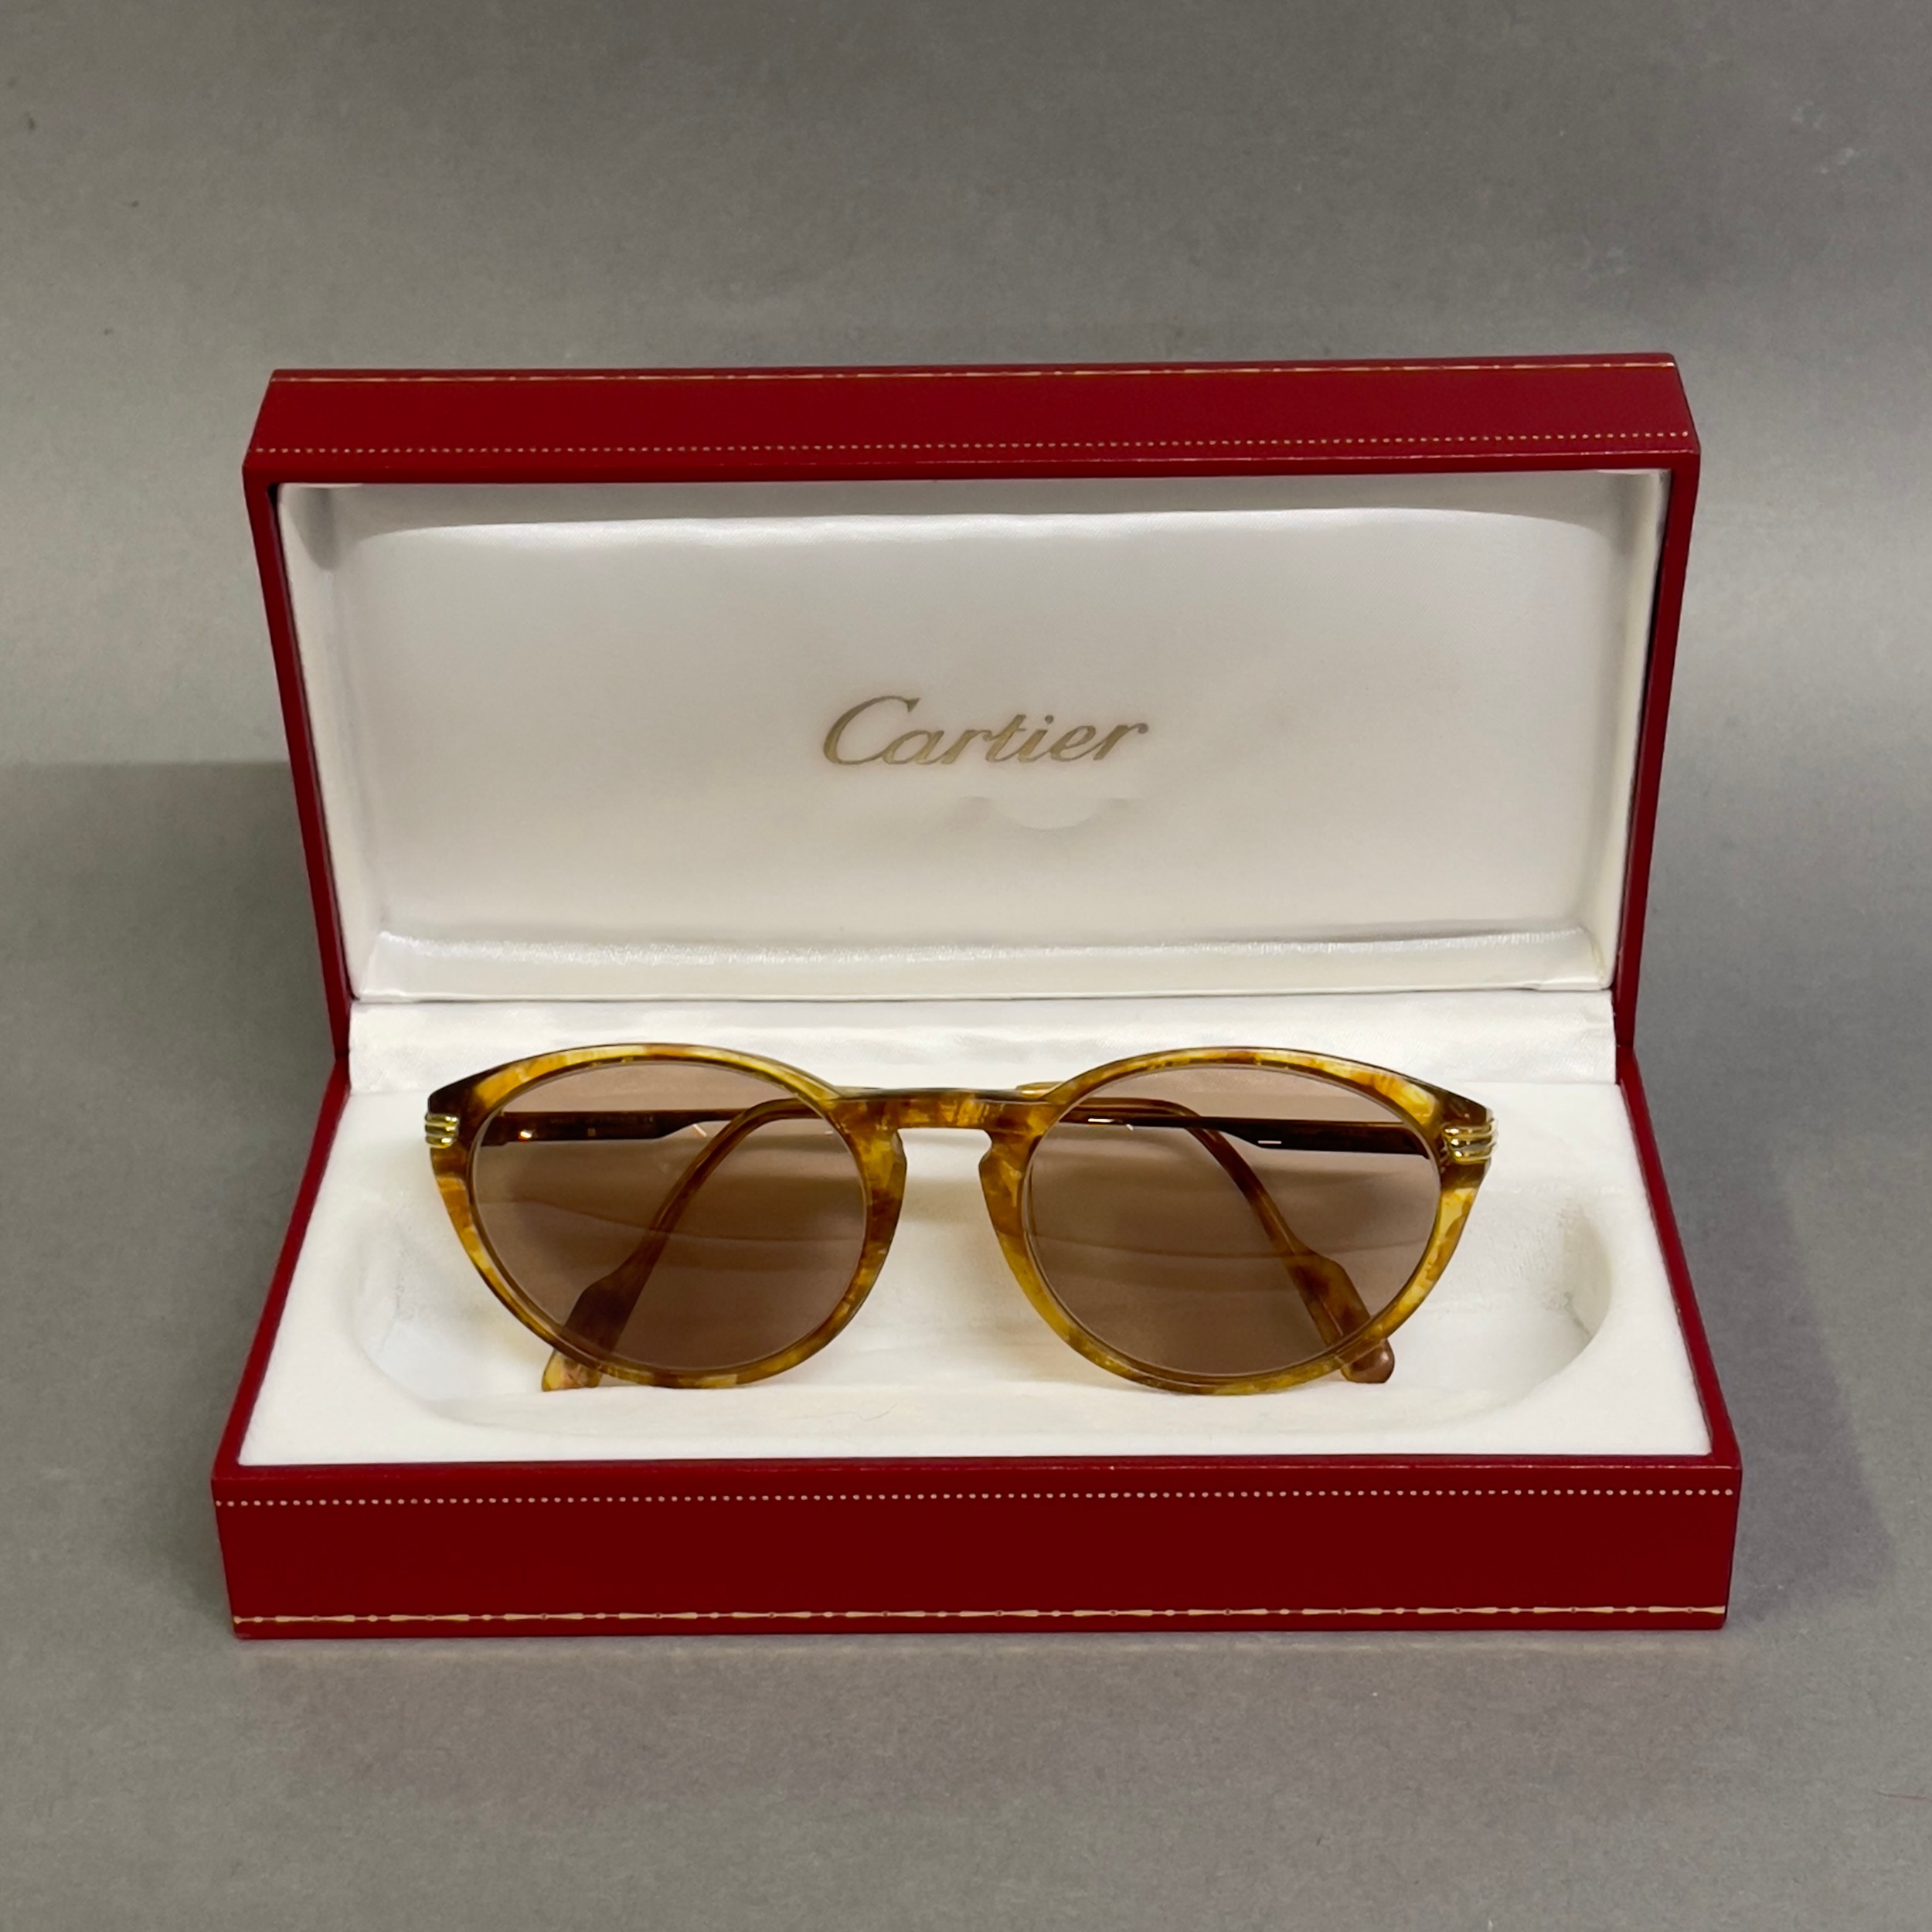 A pair of Aurore Cartier prescription sunglasses with marbled frames signed Cartier, I.D card in